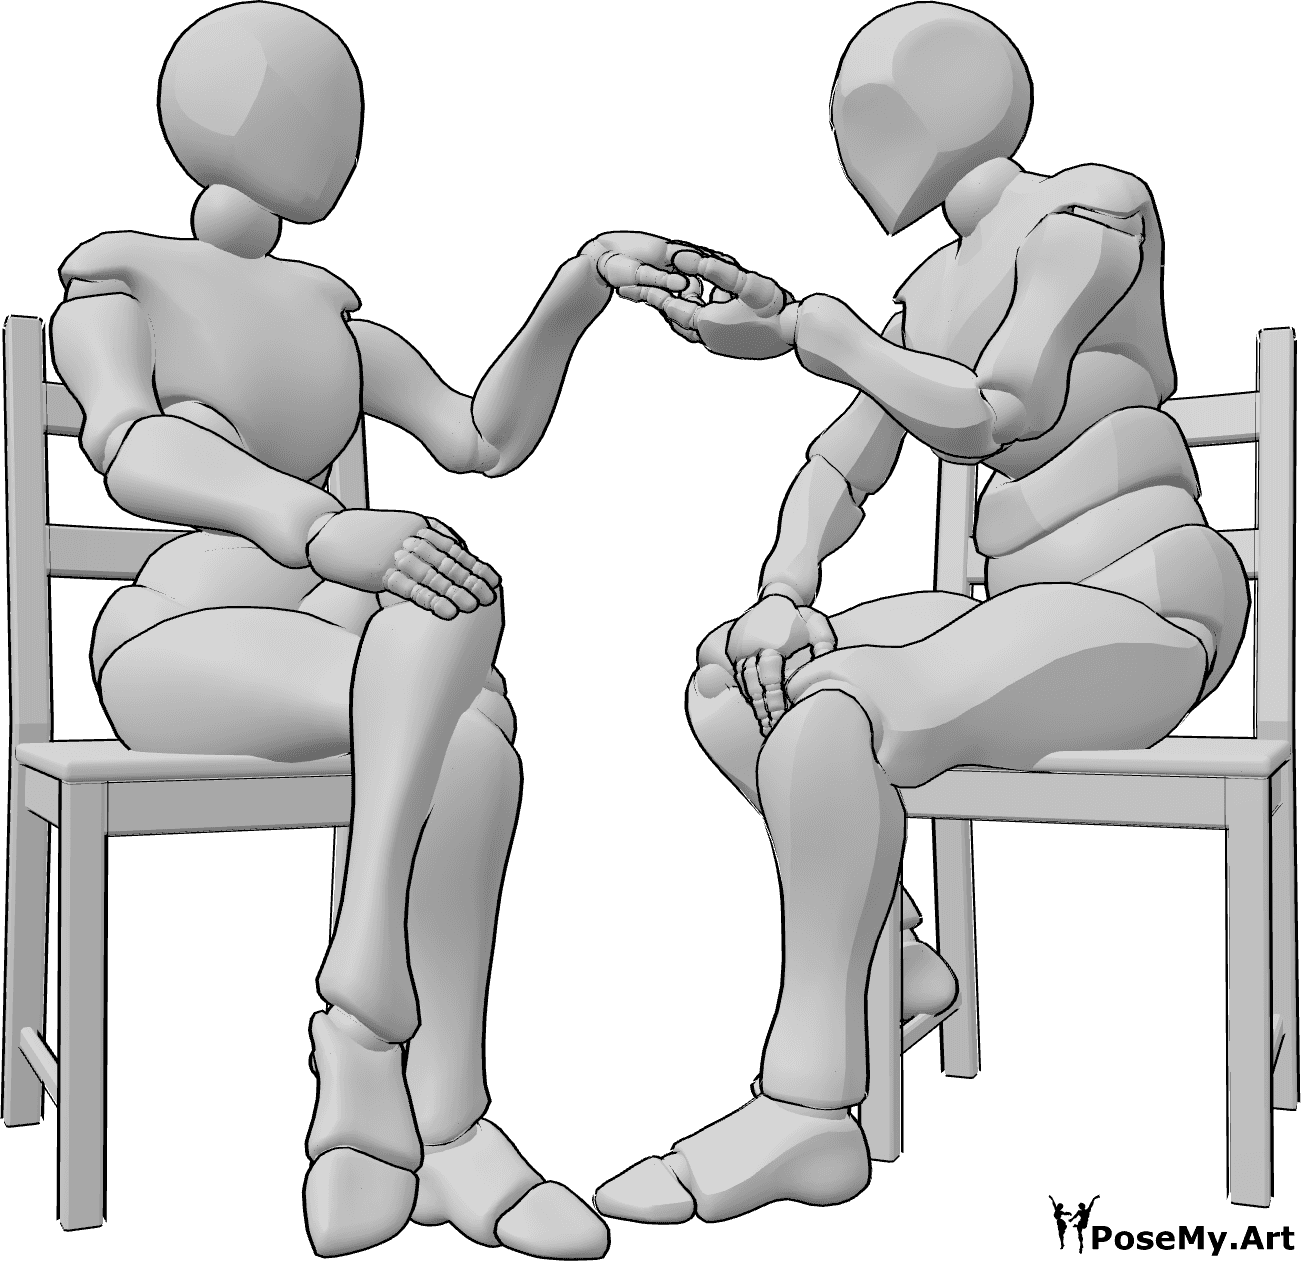 Pose Reference - Kissing hand pose - Female and male are sitting on chairs, the male is about to kiss the female's hand